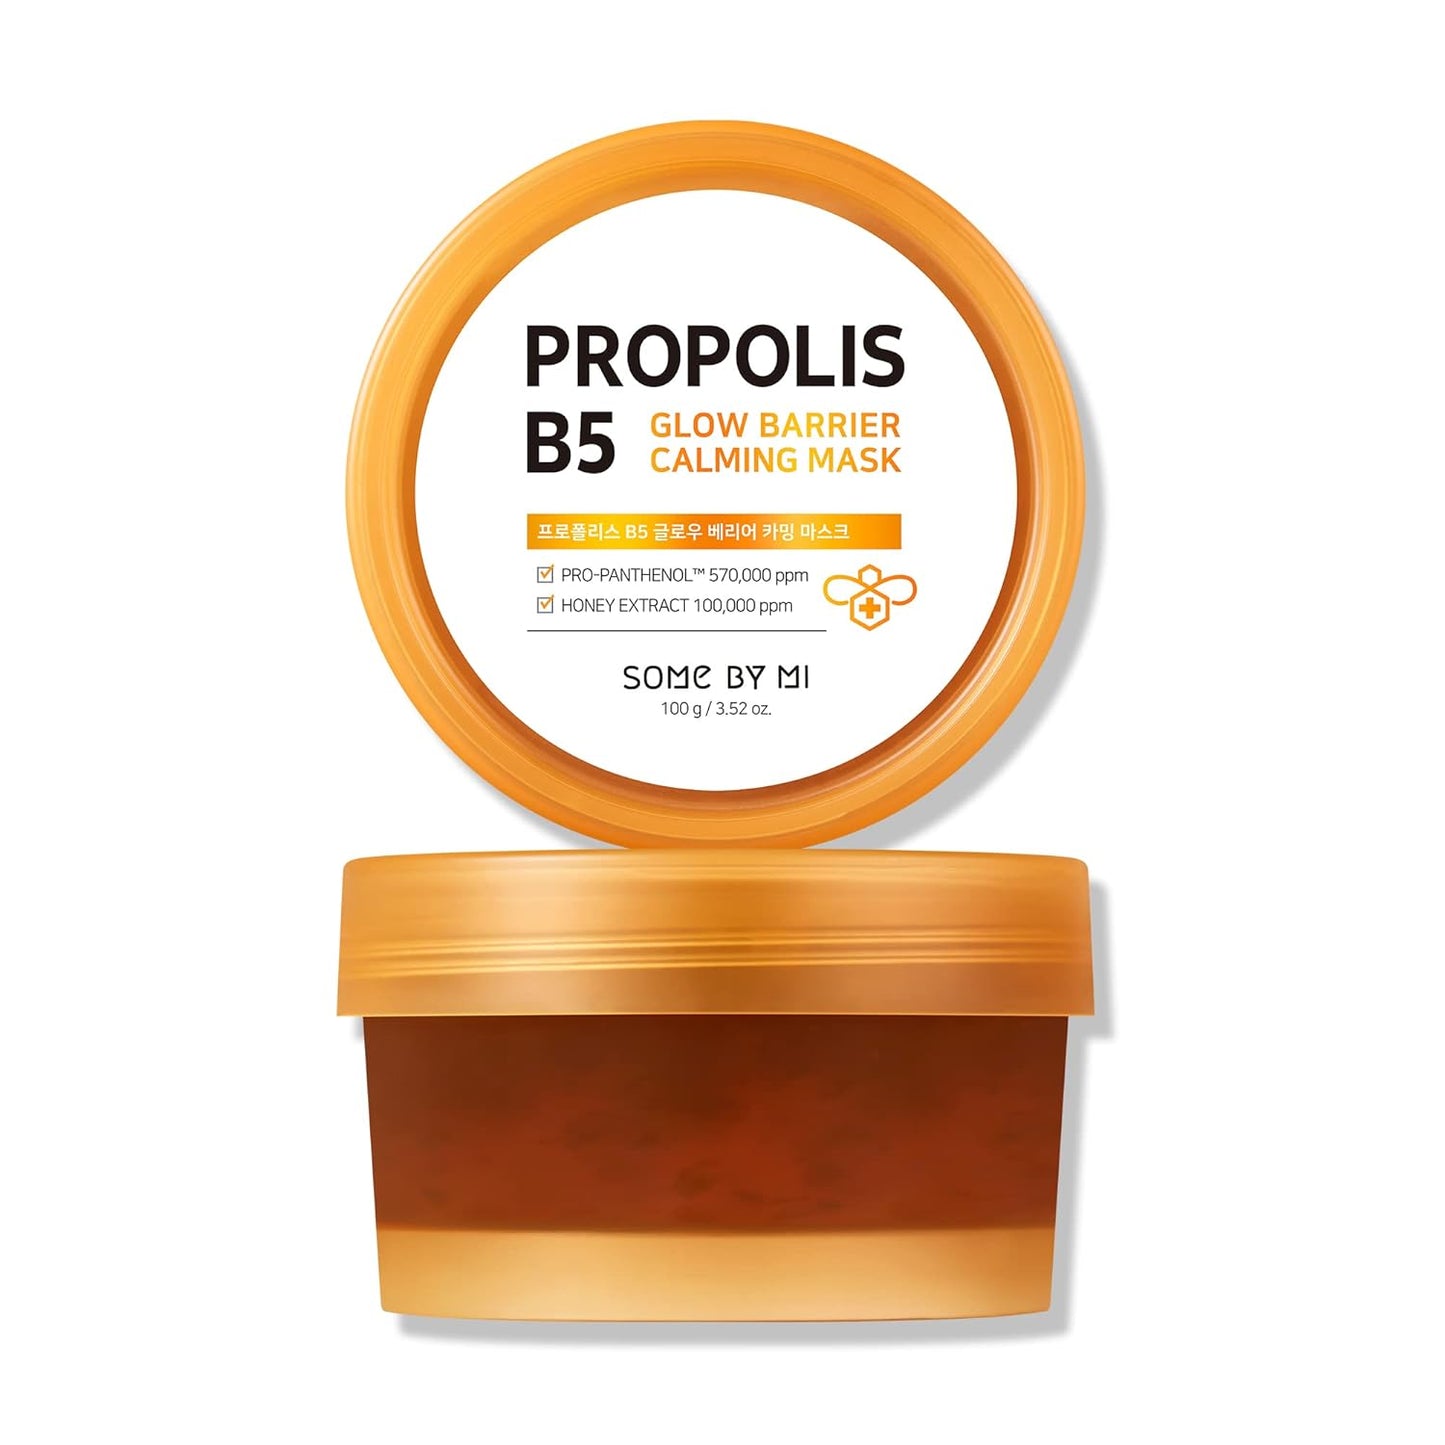 SOME BY MI Propolis B5 Grow Barrier Calming Mask